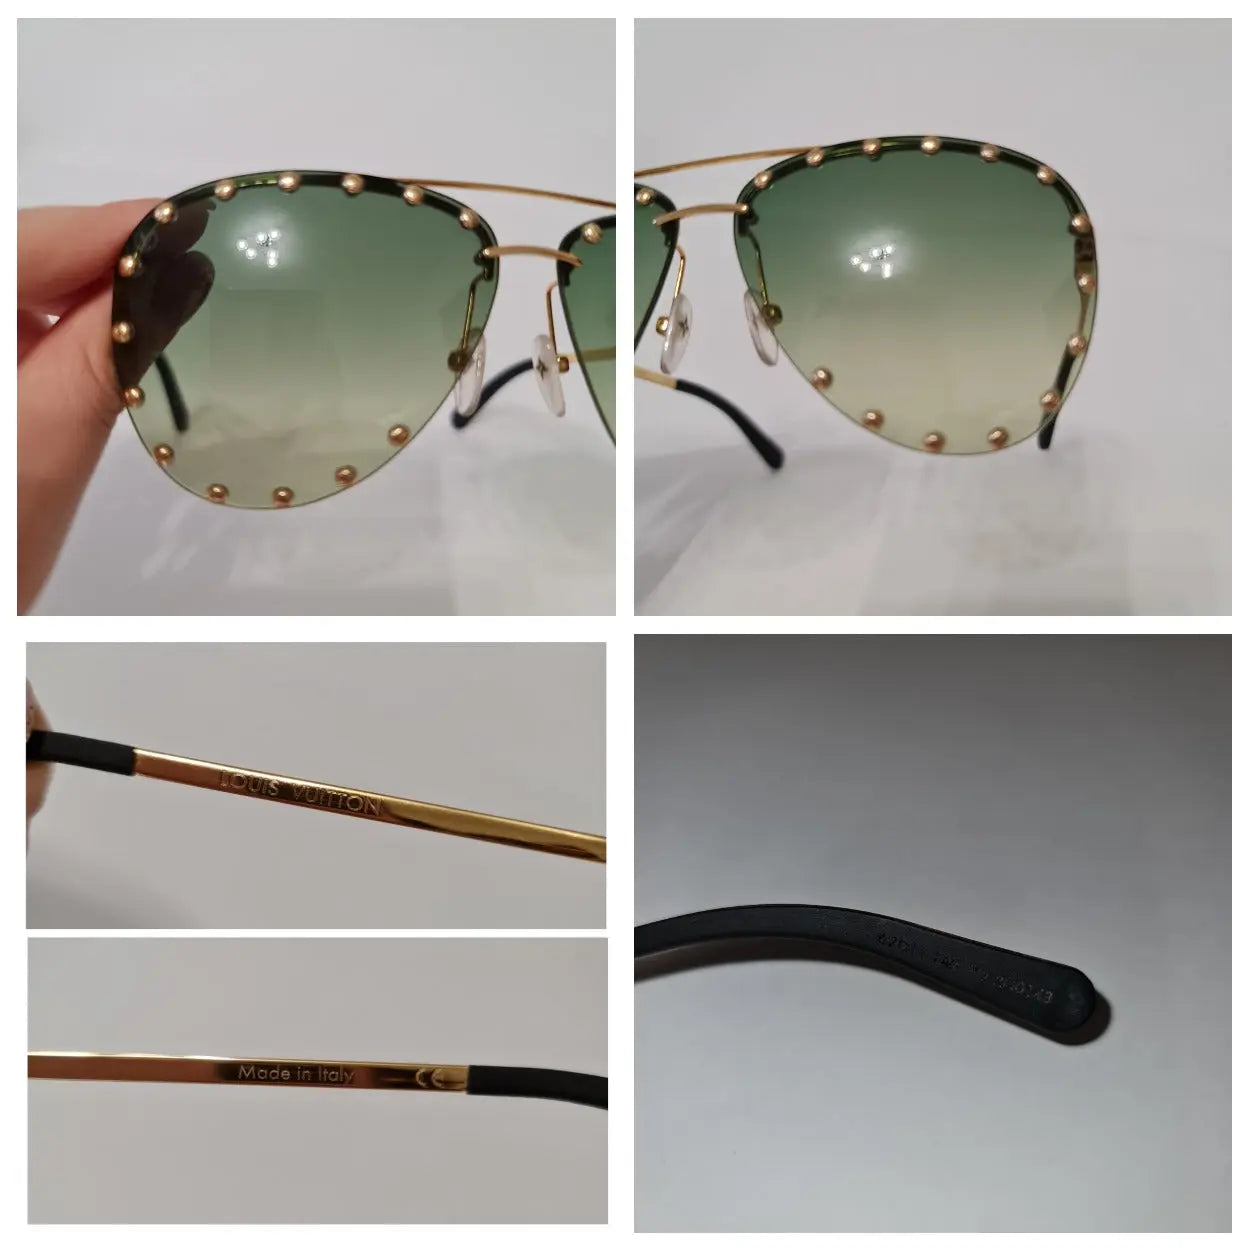 Louis Vuitton The Party Sunglasses in Gray